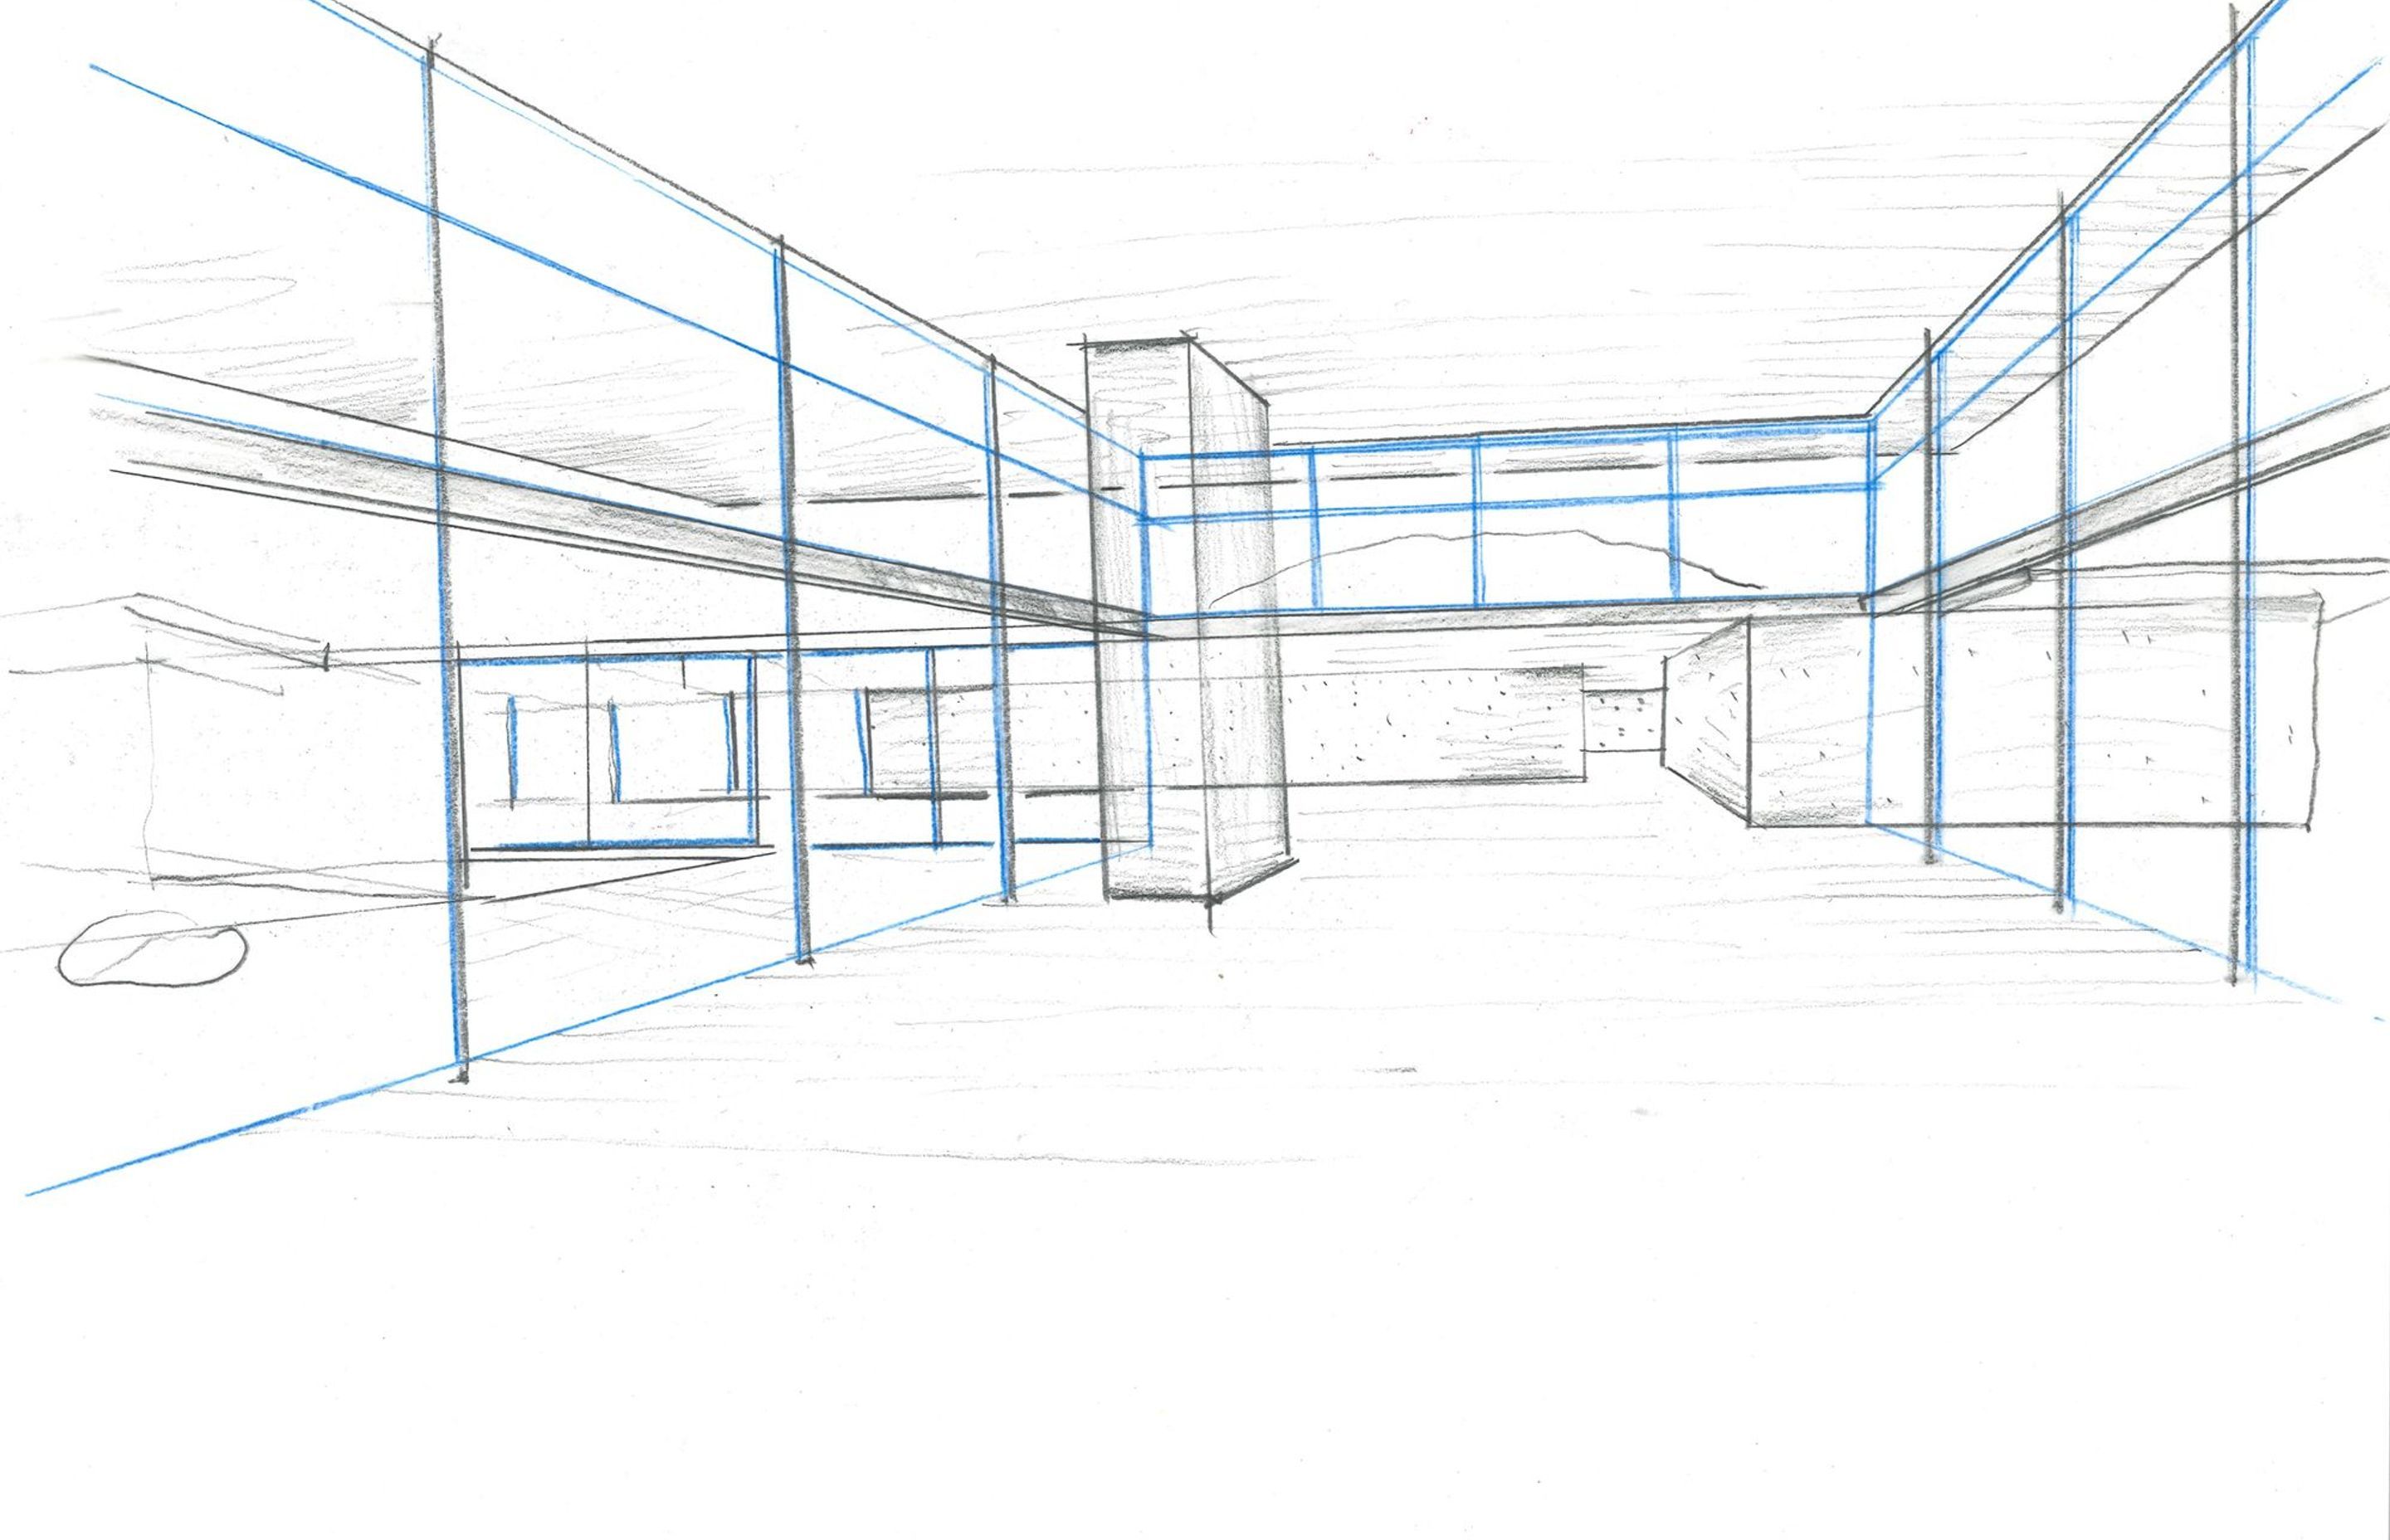 A perspective drawing of the main living area and garage entry corridor by the architects RB Studio.